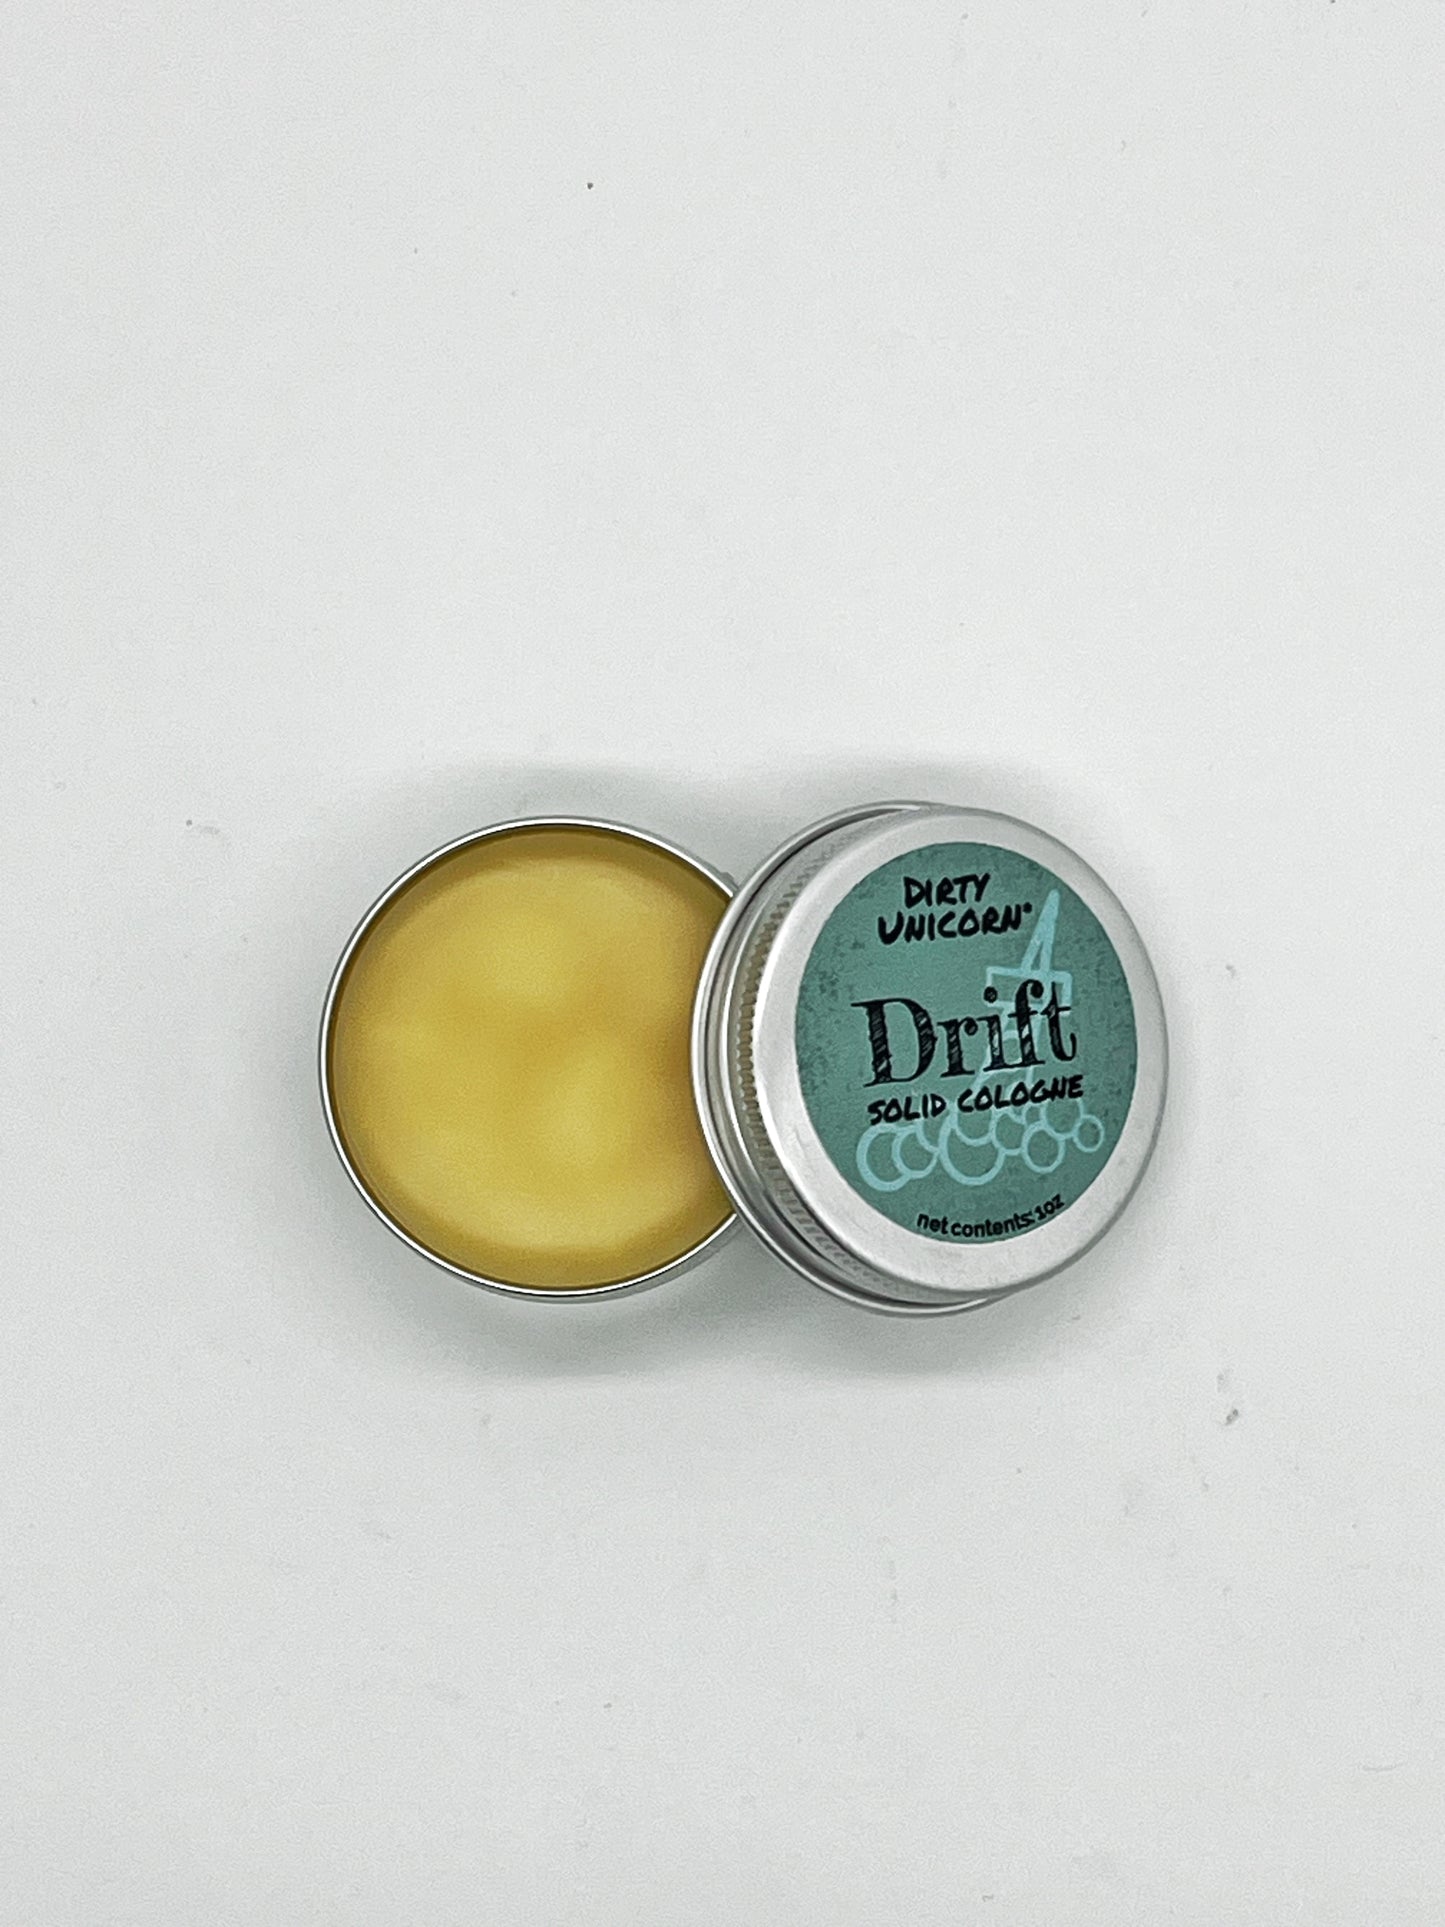 Drift Solid Cologne